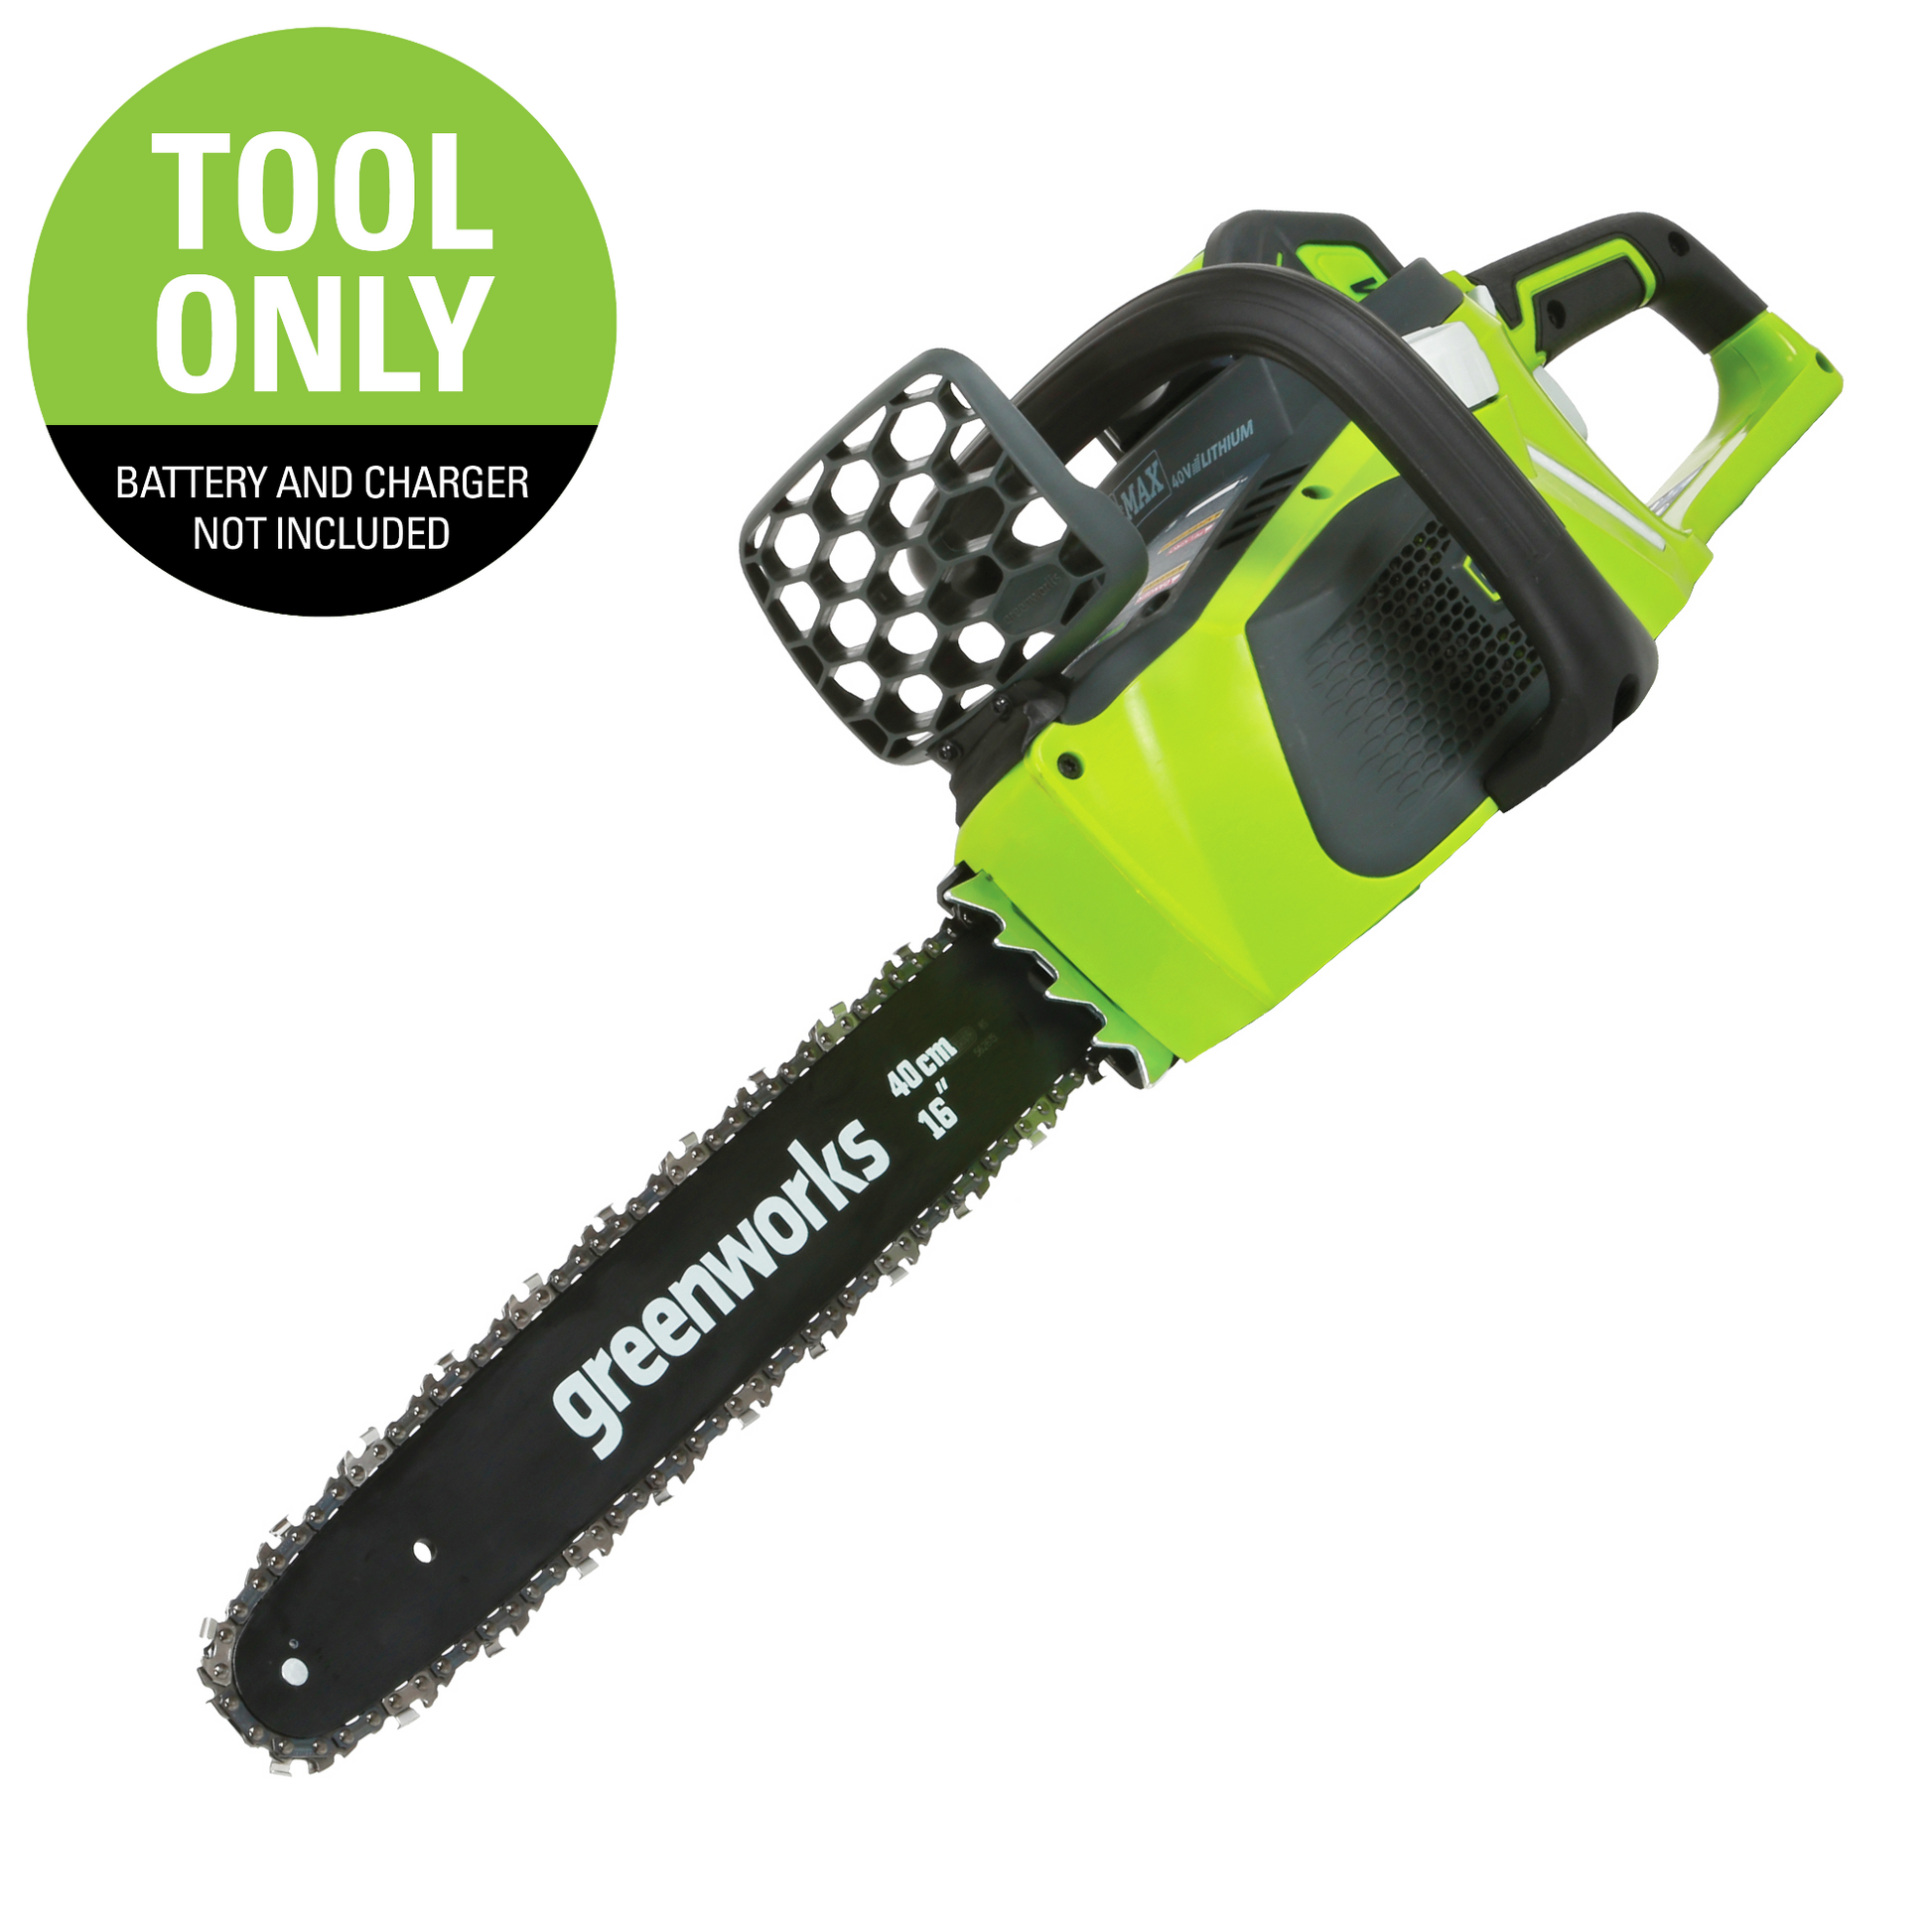 Greenworks G-Max Cordless 40 Volt Digipro Brushless Chainsaw - Tool Only, Exotic Green